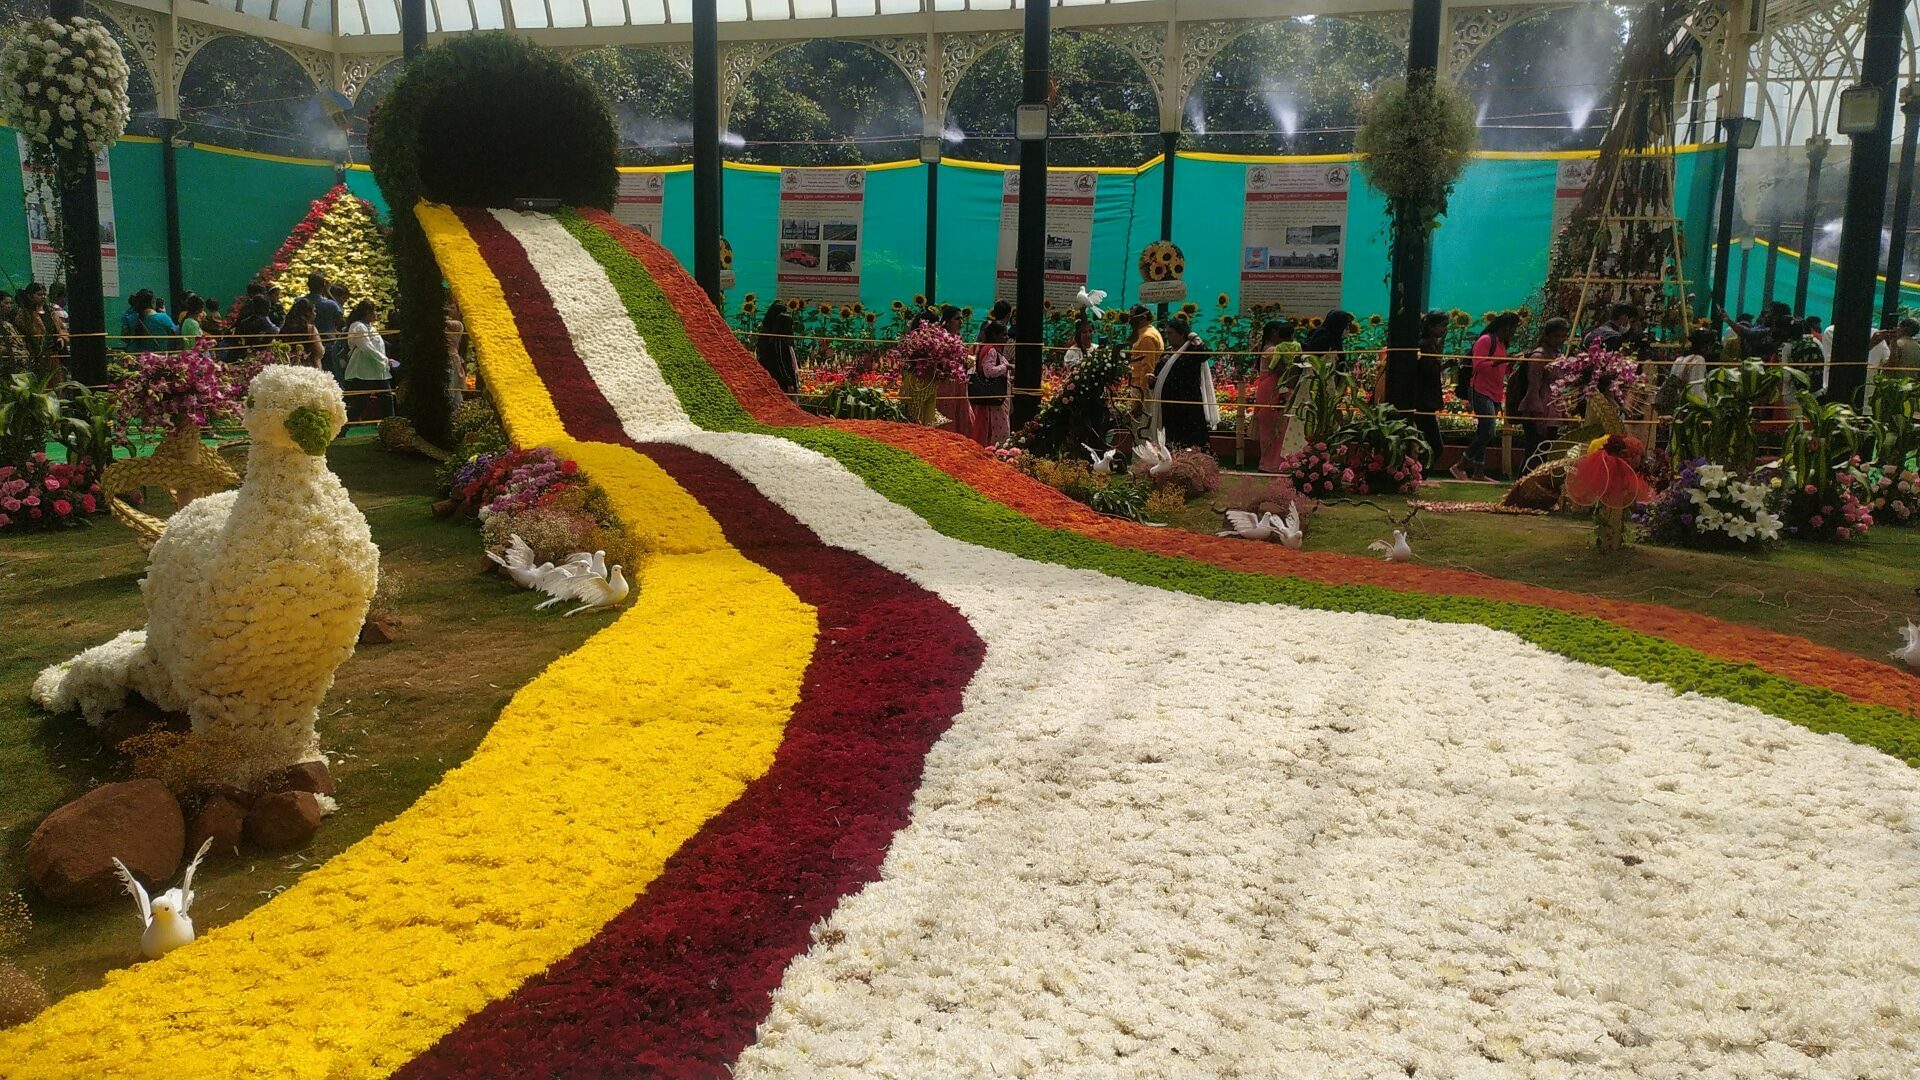 The 213th edition of the iconic Republic Day Lalbagh flower show is a